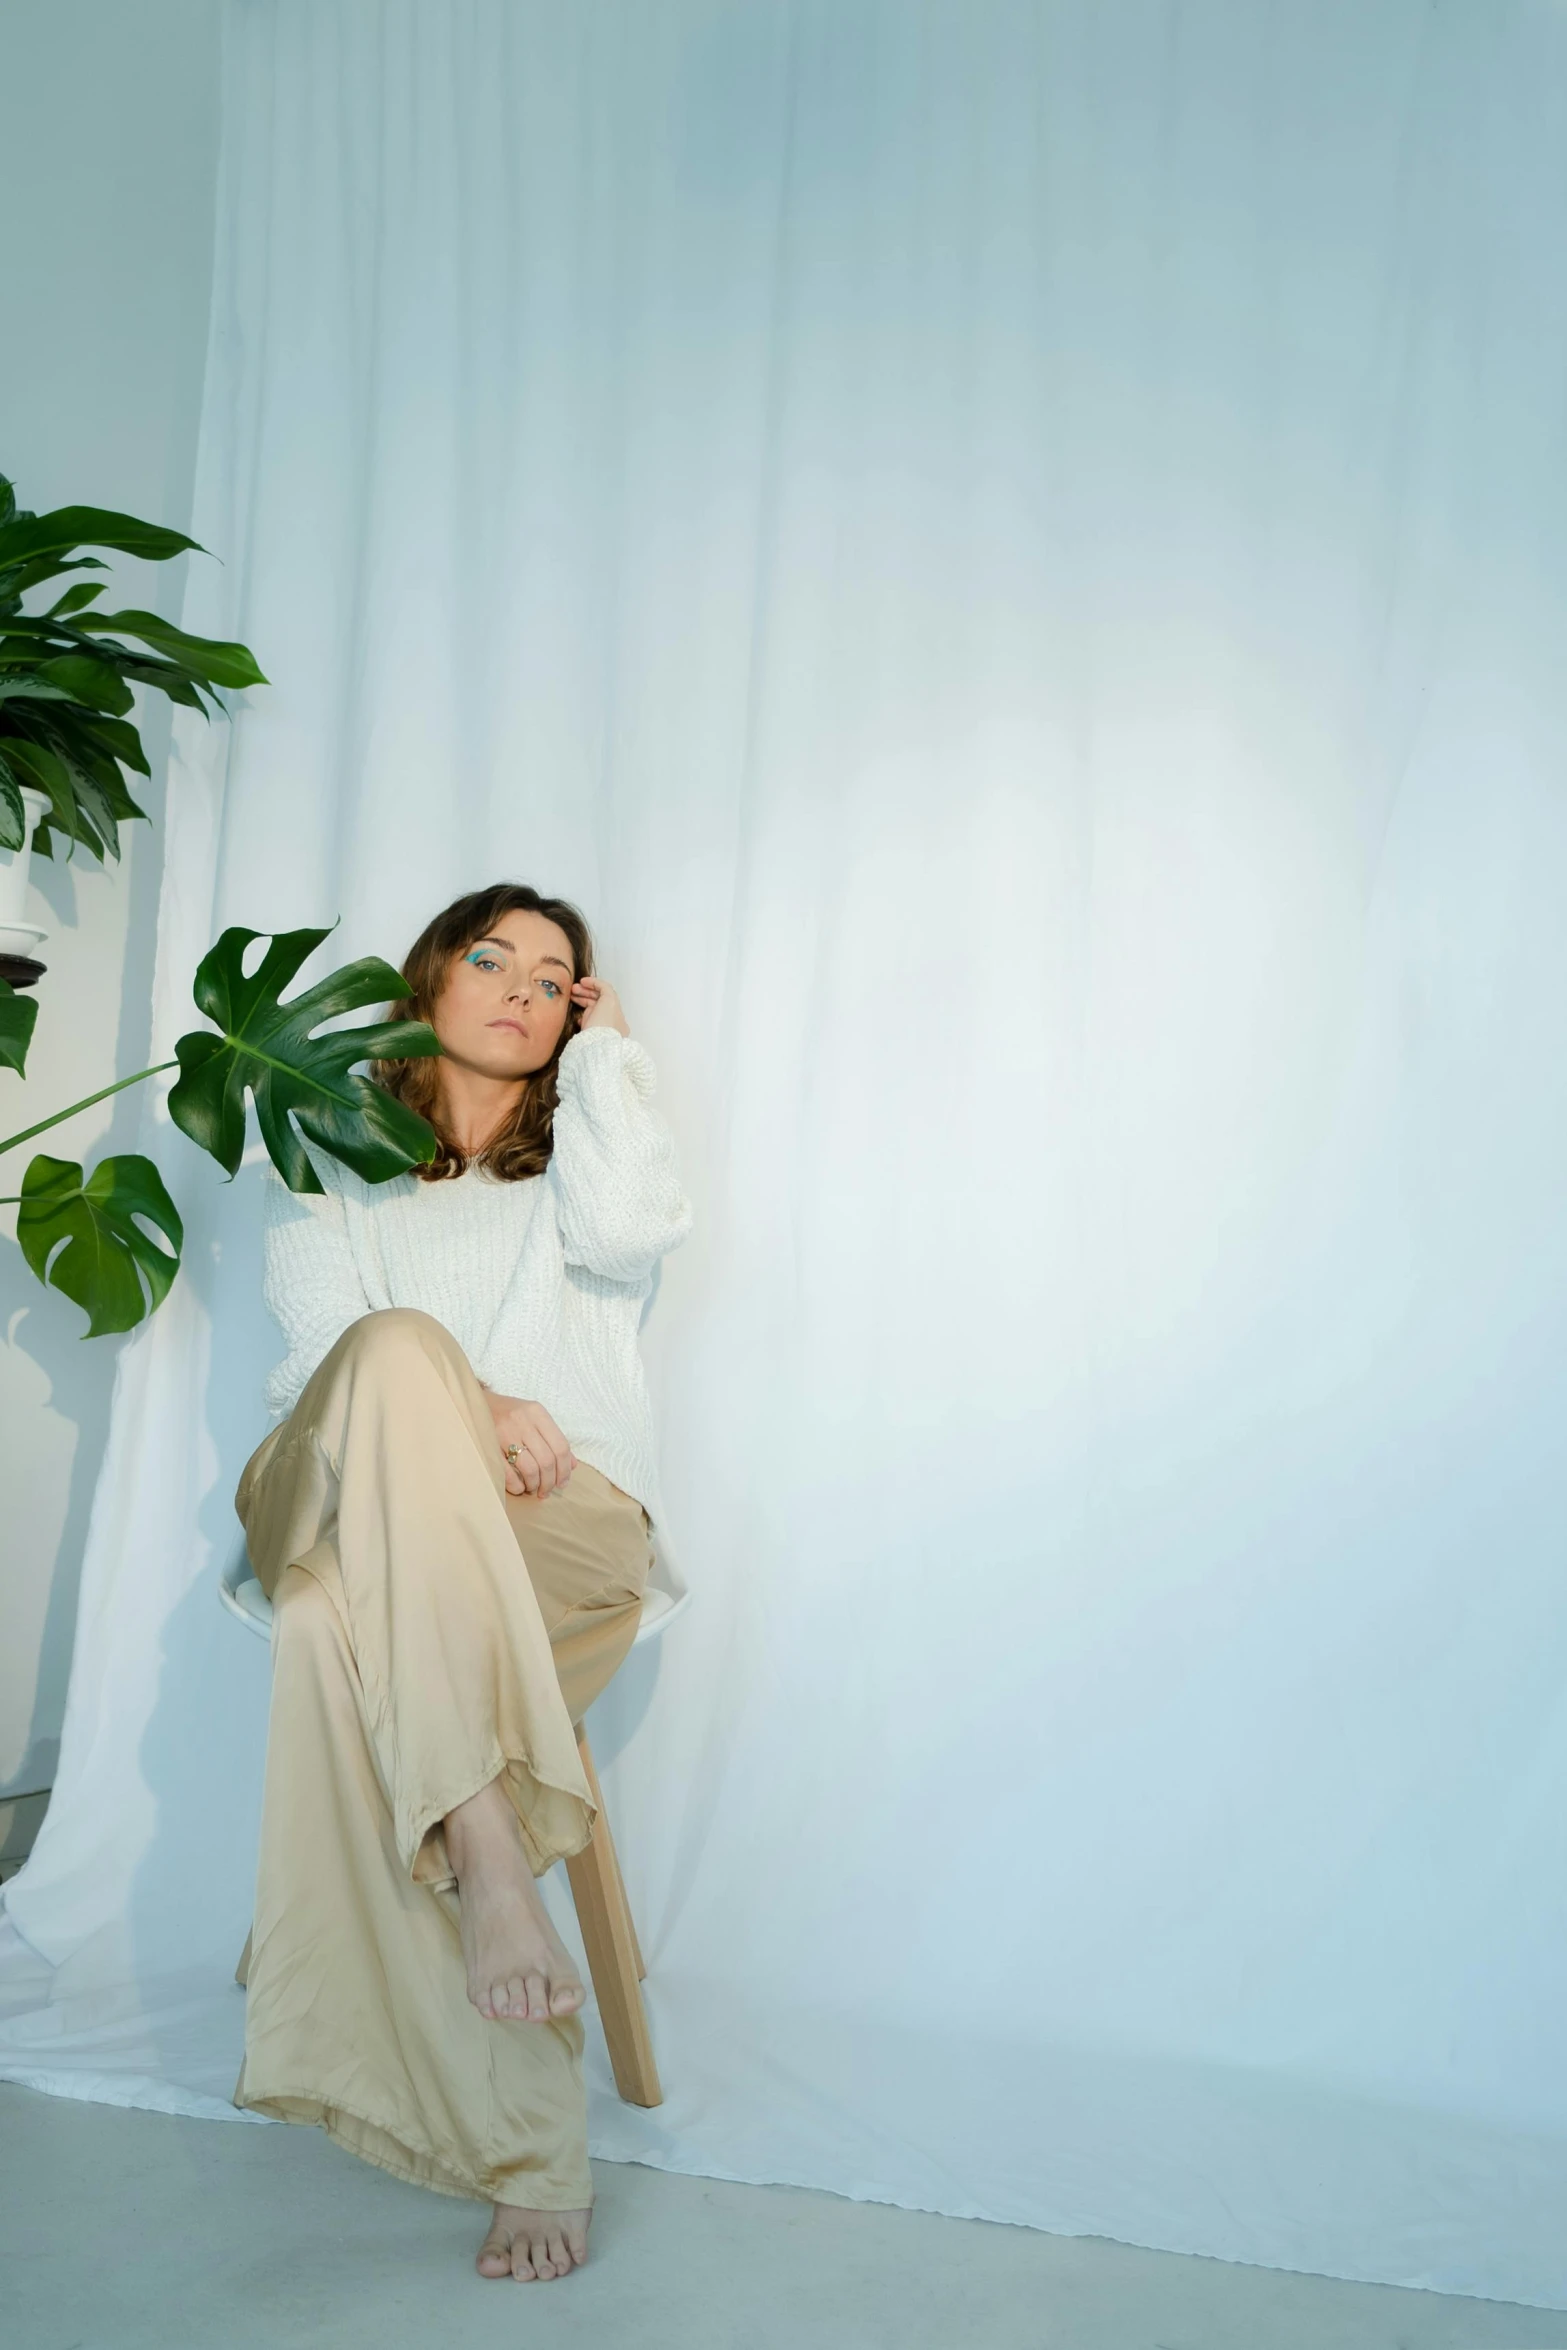 a woman sitting on a chair next to a potted plant, wearing a white sweater, non-illuminated backdrop, cynthwave, fully covered in drapes